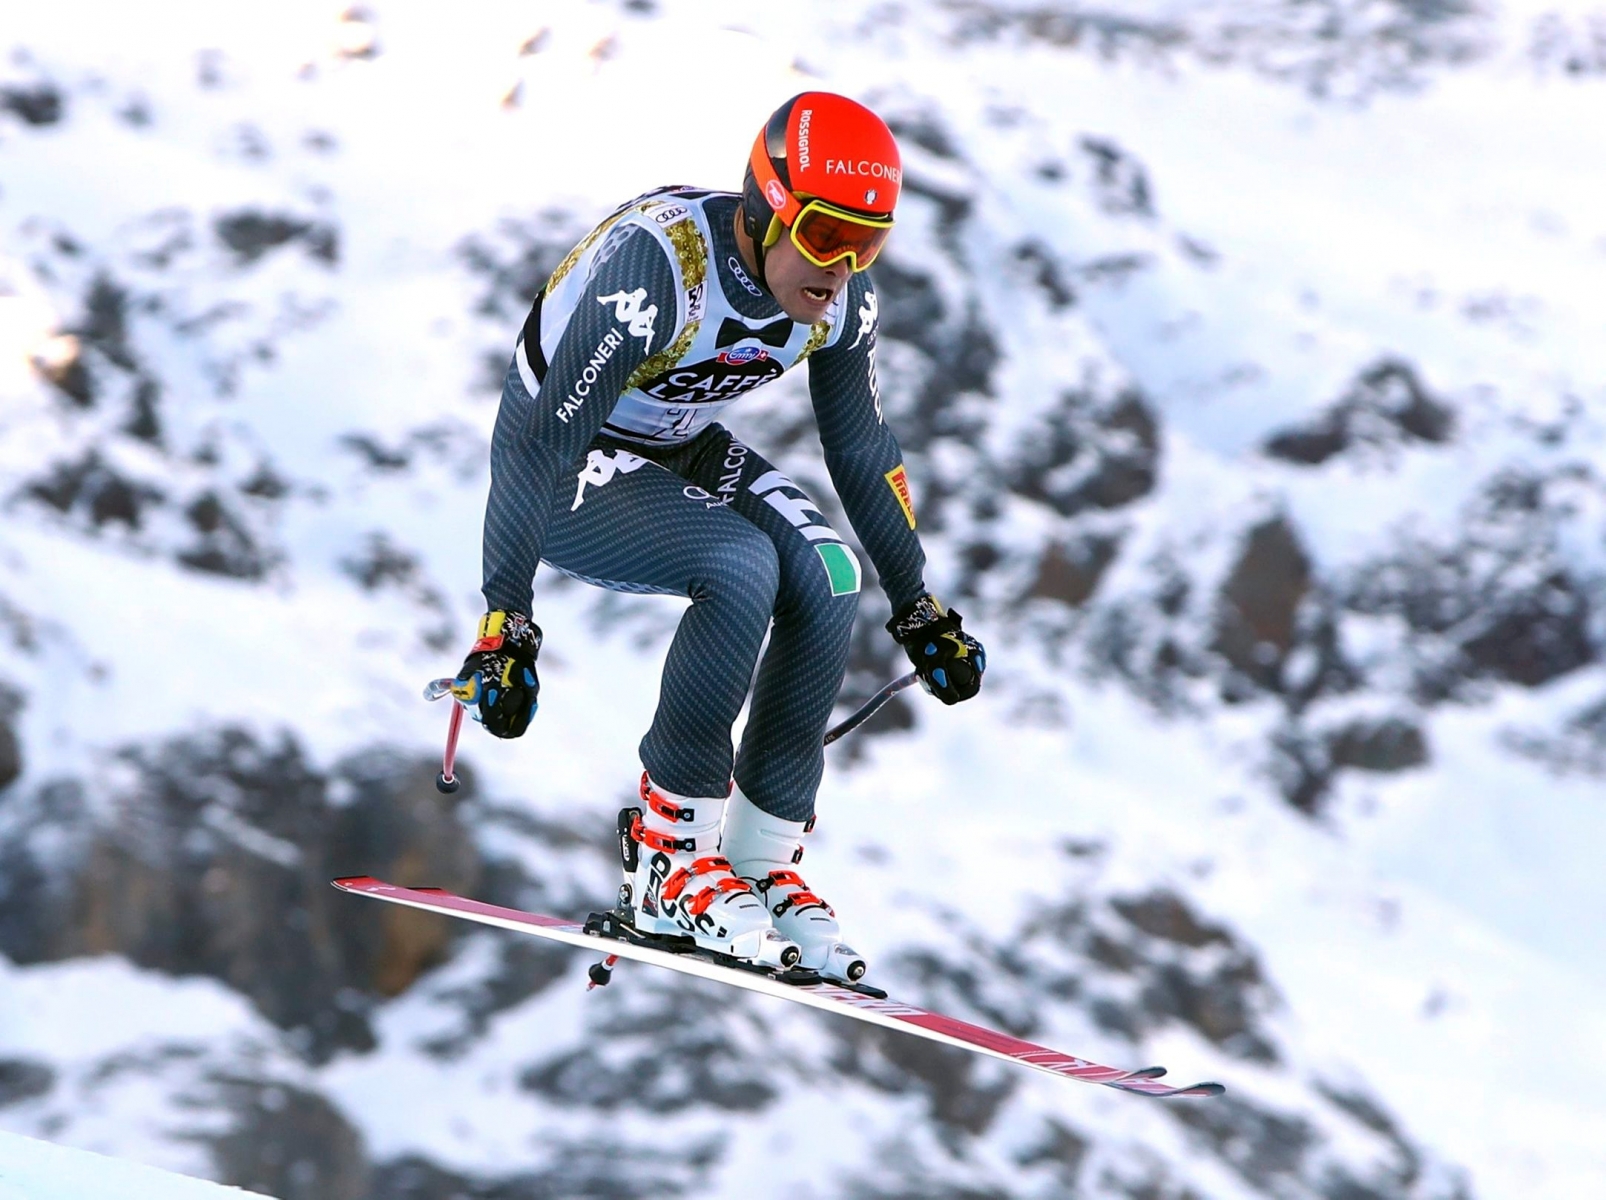 Italy's Christof Innerhofer is airborne during an alpine ski, mens' World Cup downhill training in Santa Caterina, Italy, Monday, Dec. 26, 2016. (AP Photo/Alessandro Trovati) Italy Alpine Skiing World Cup